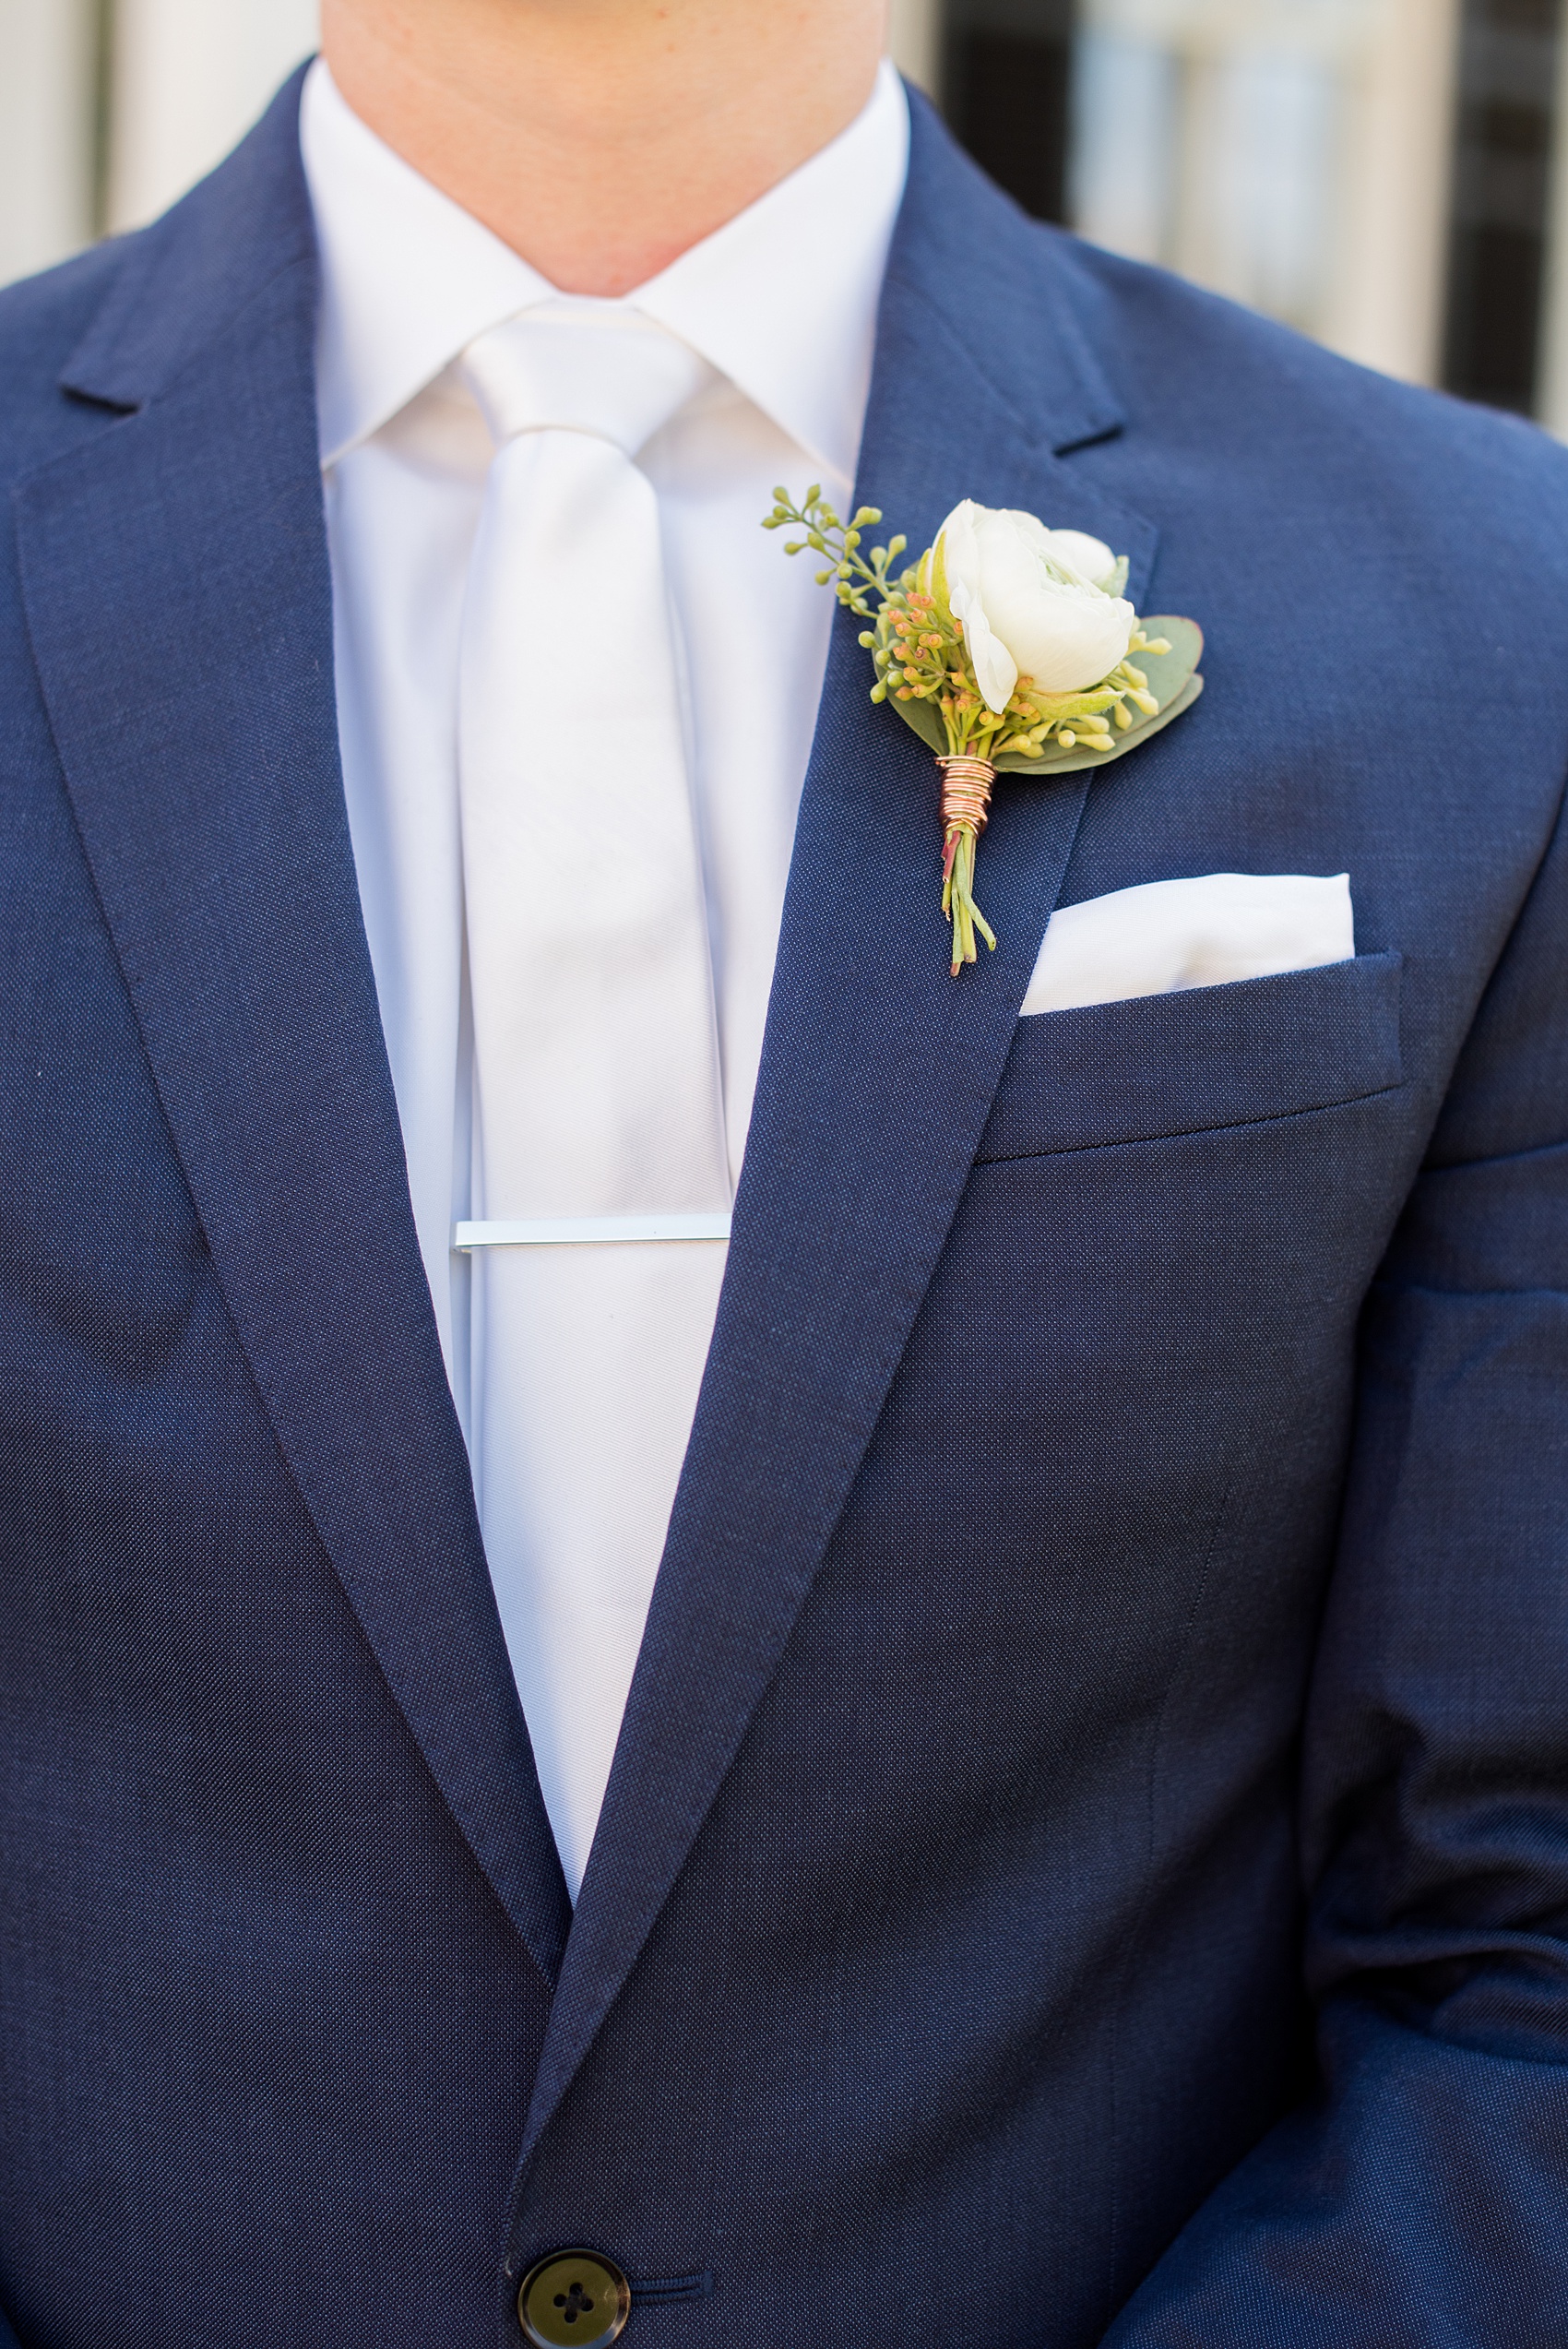 Mikkel Paige Photography pictures from a wedding at Merrimon-Wynne House in Raleigh, NC. Detail photo of the grooms's blue linen suit, white boutonniere tied with copper wire and skinny tie.